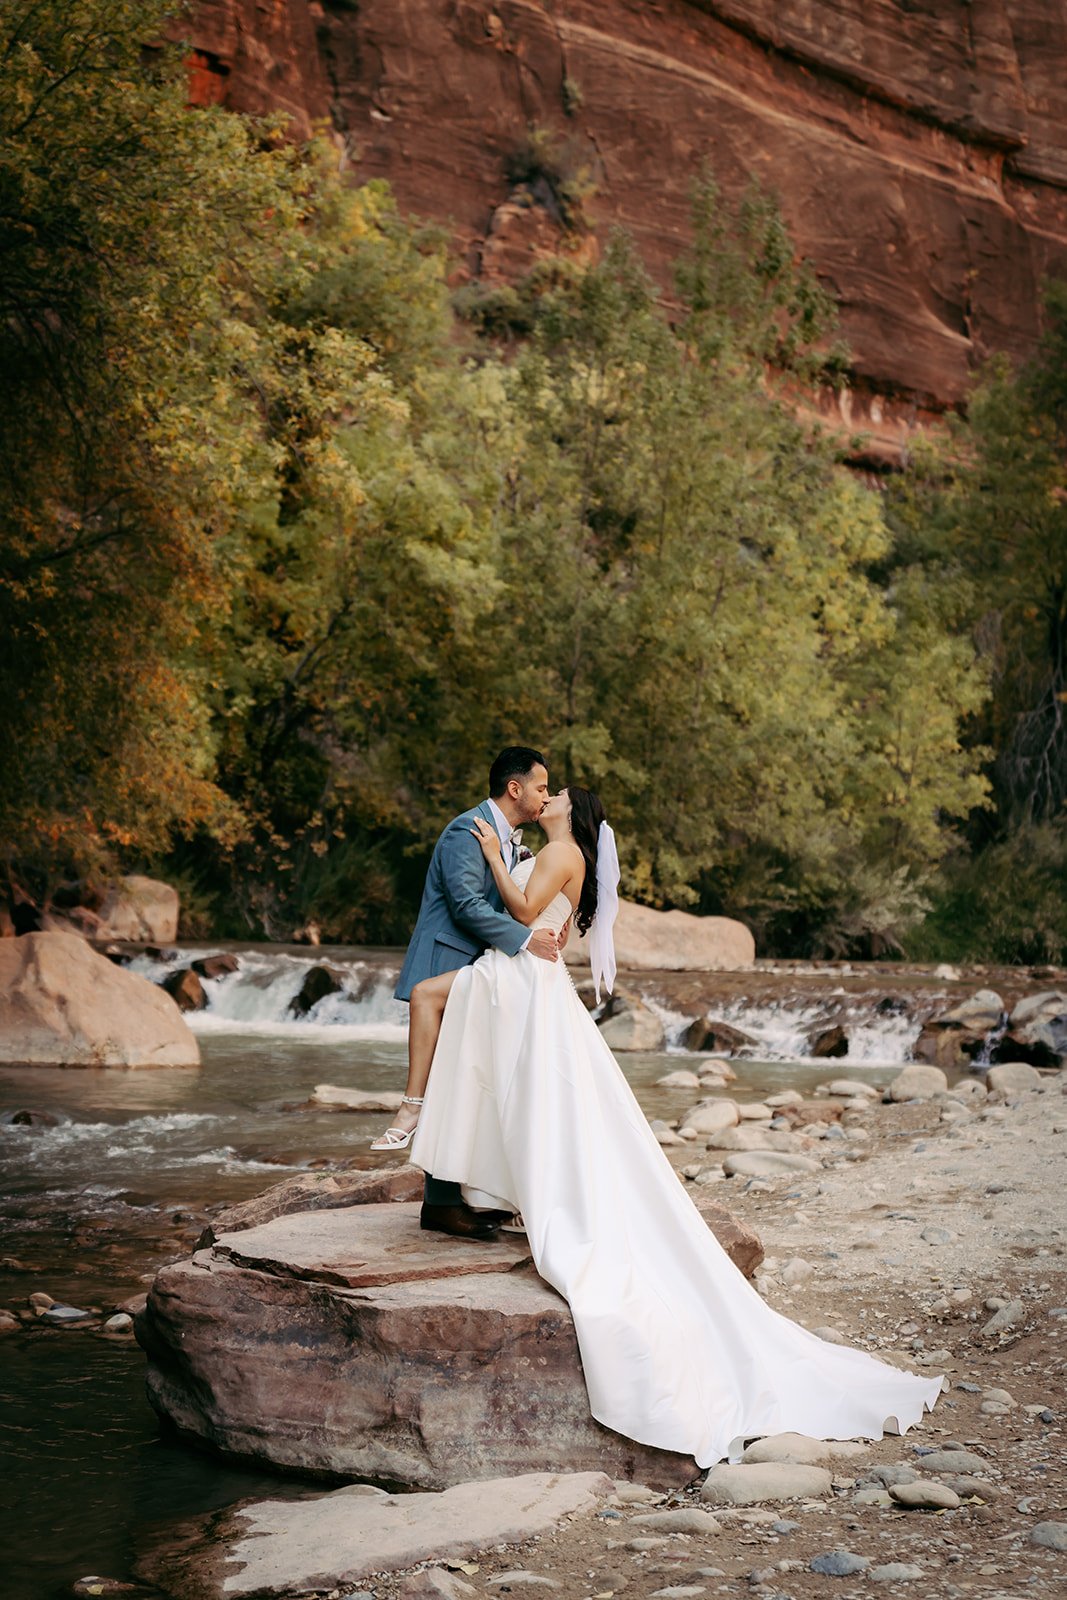  gorgeous couple kissing each other with a river in the back 